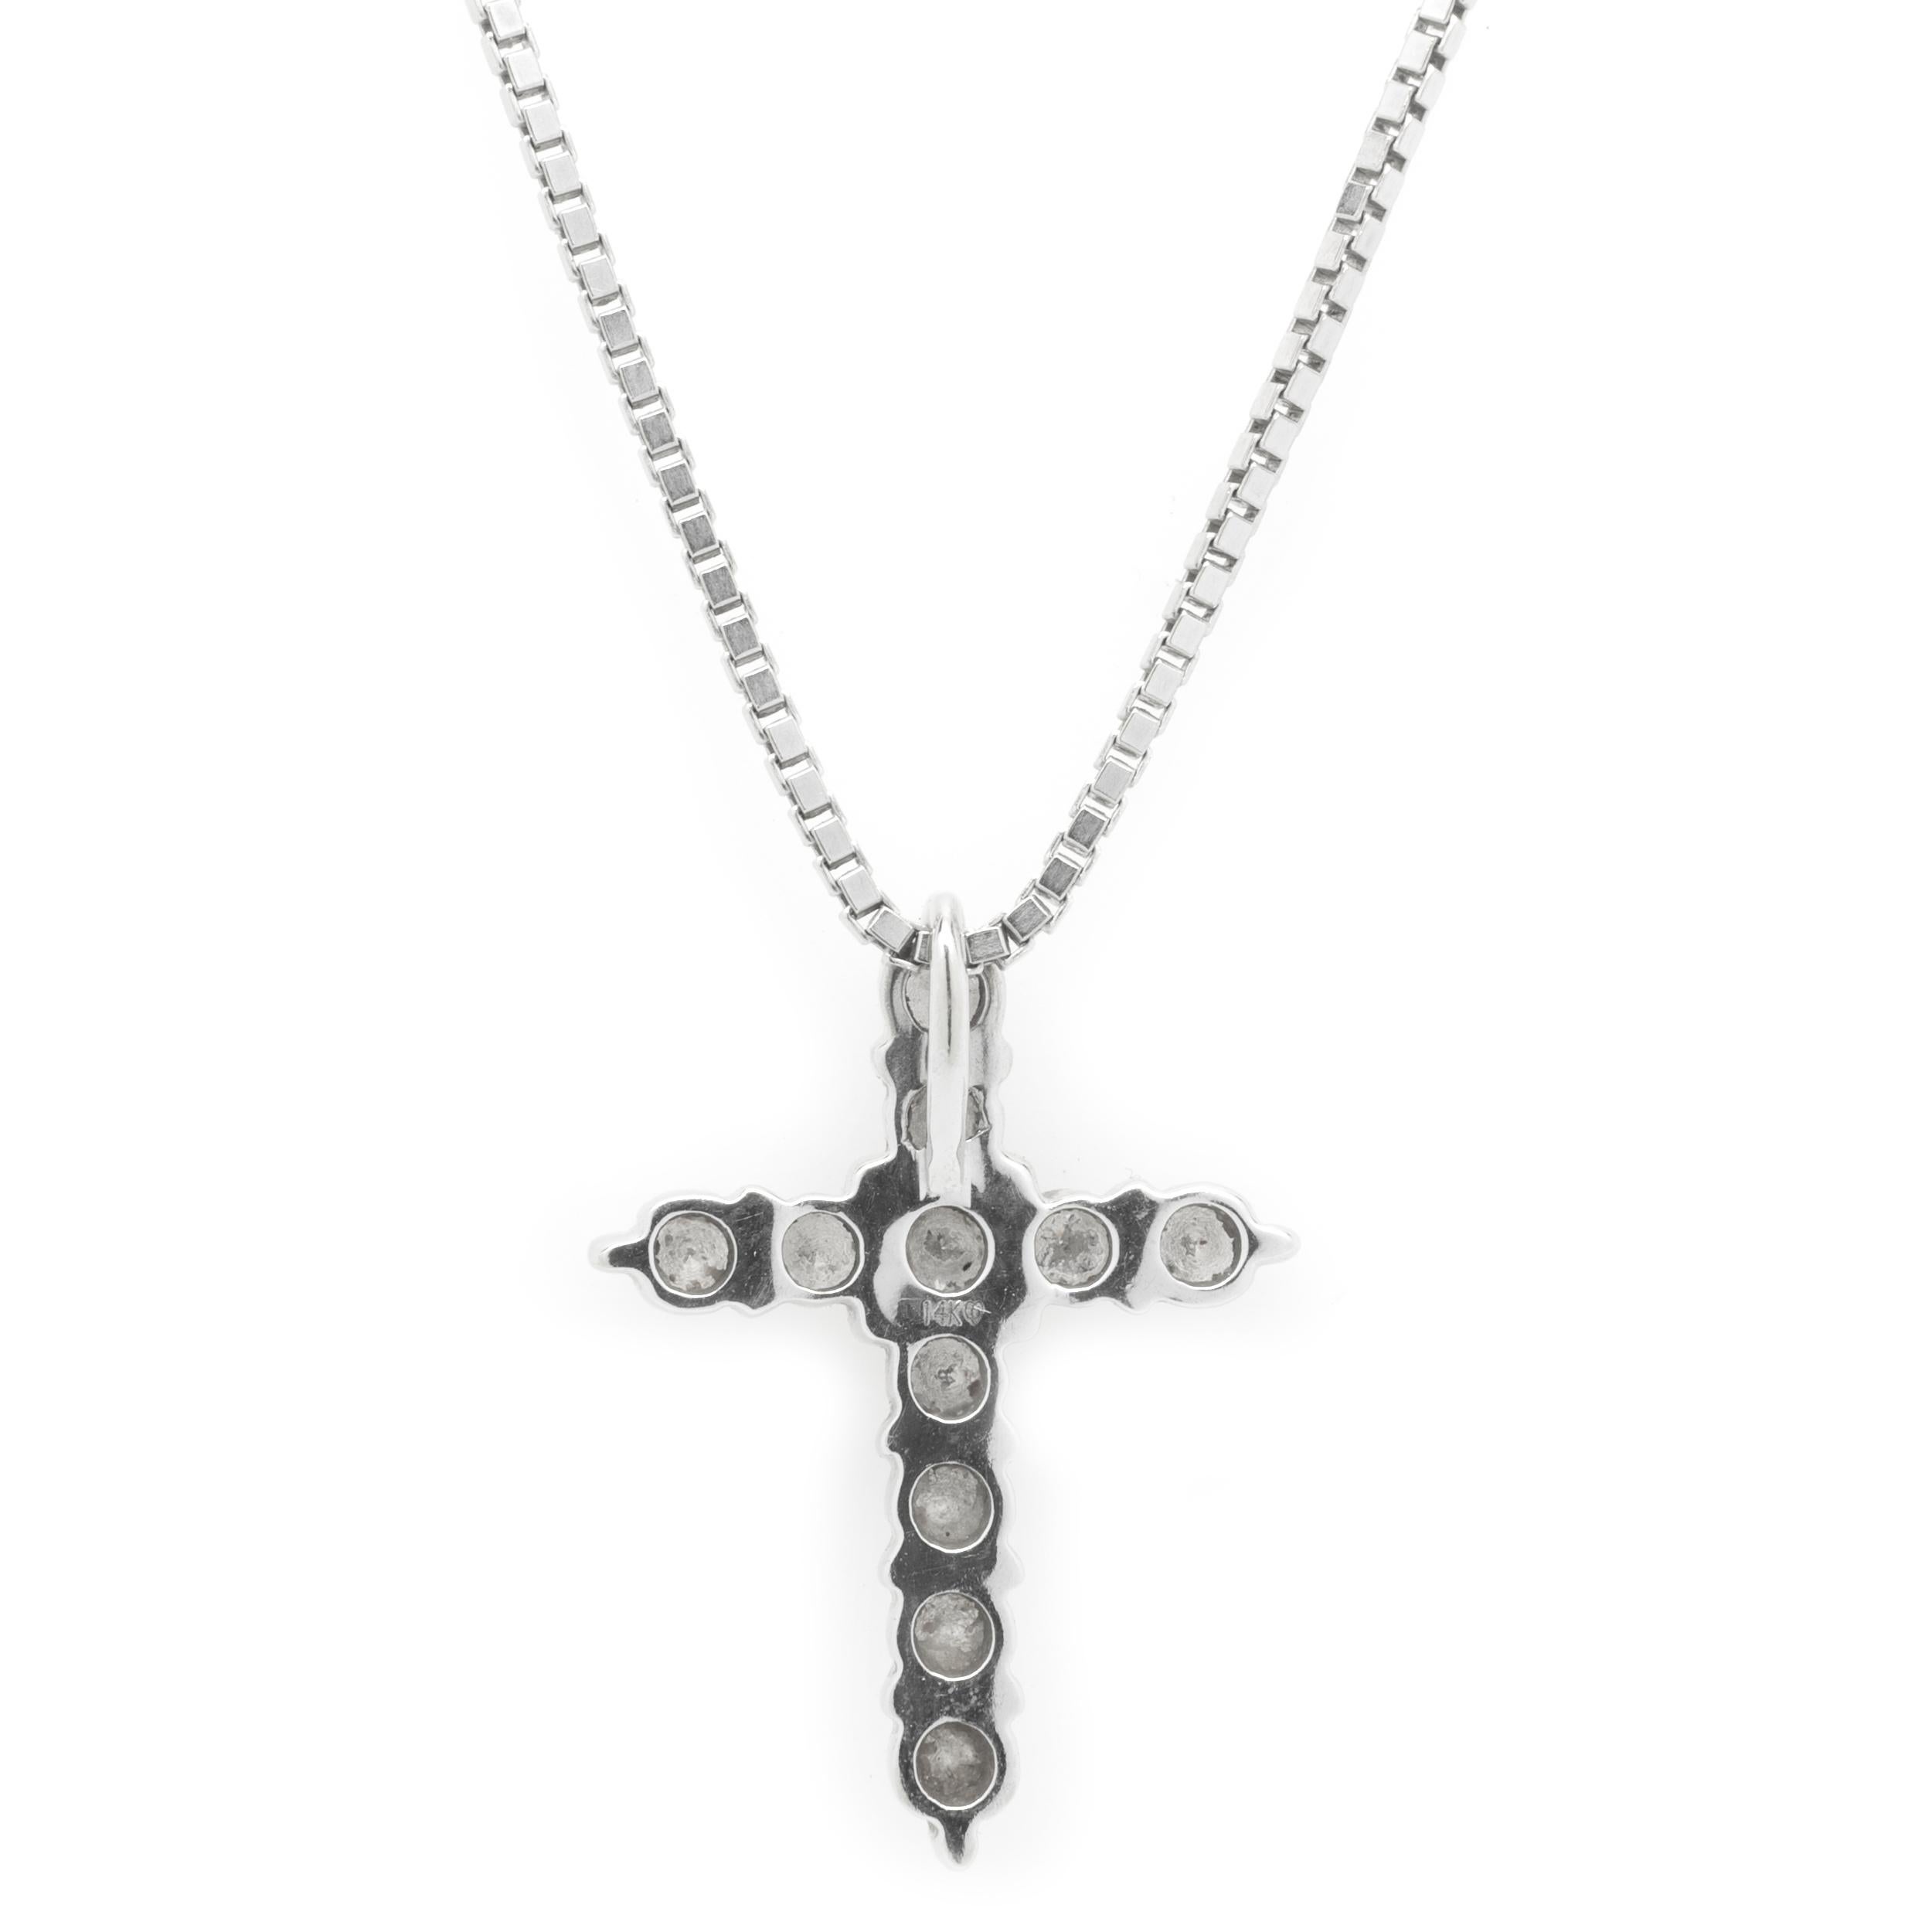 14 Karat White Gold Diamond Cross Necklace In Excellent Condition For Sale In Scottsdale, AZ